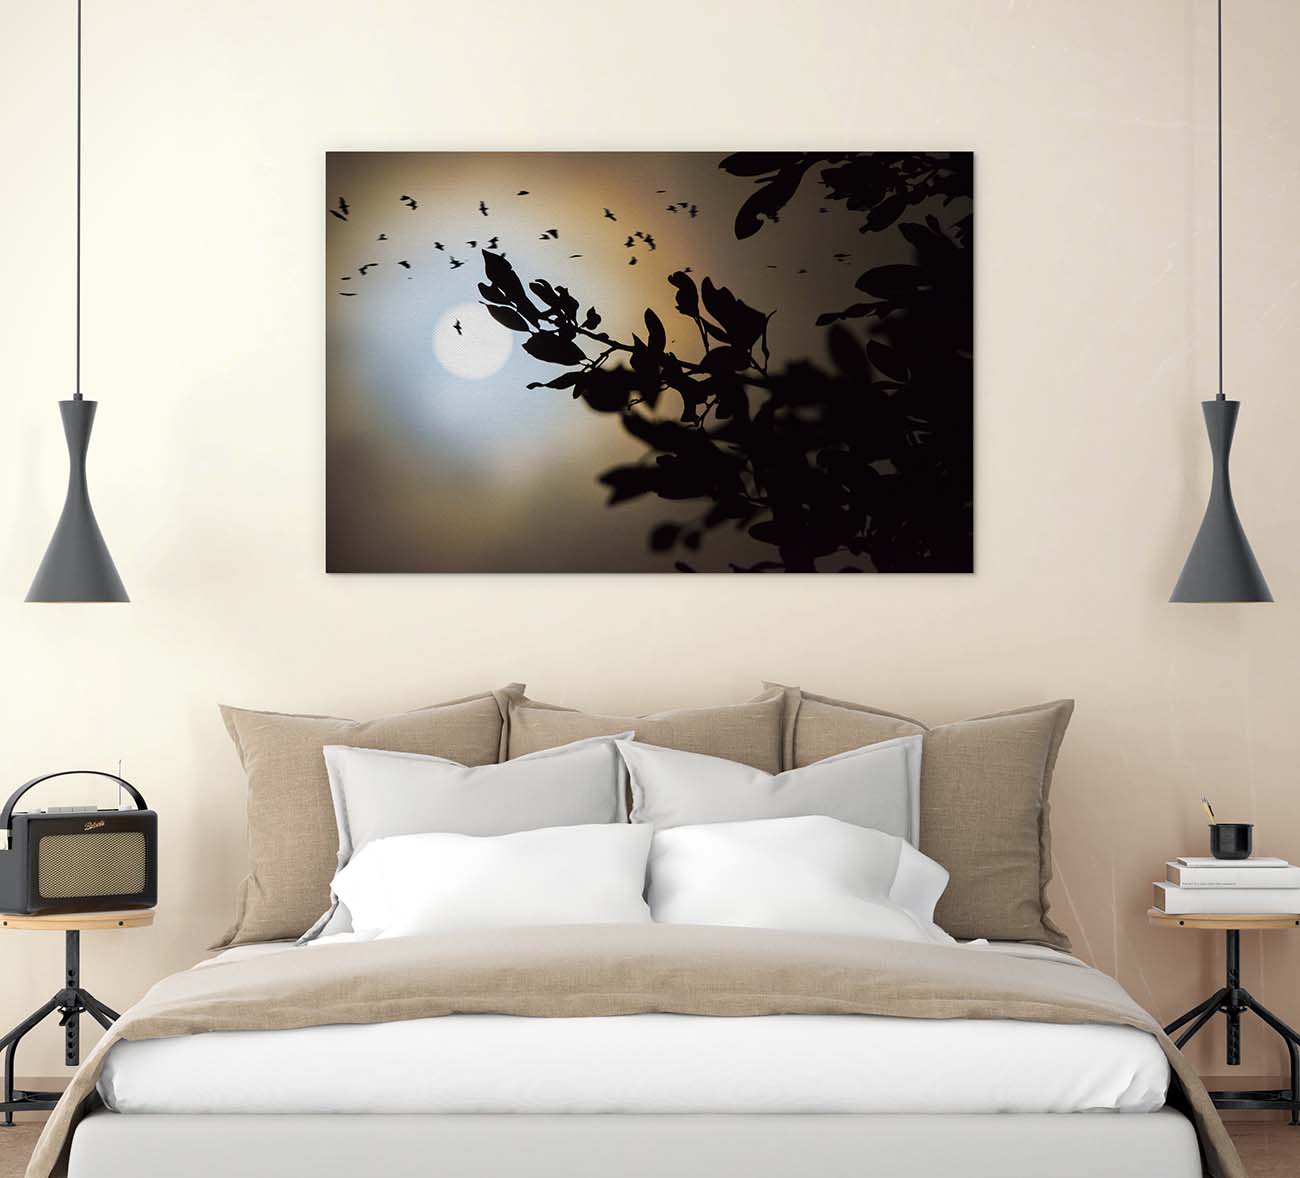 Moon Bats photograph by Doug LaRue large print over a king size bed